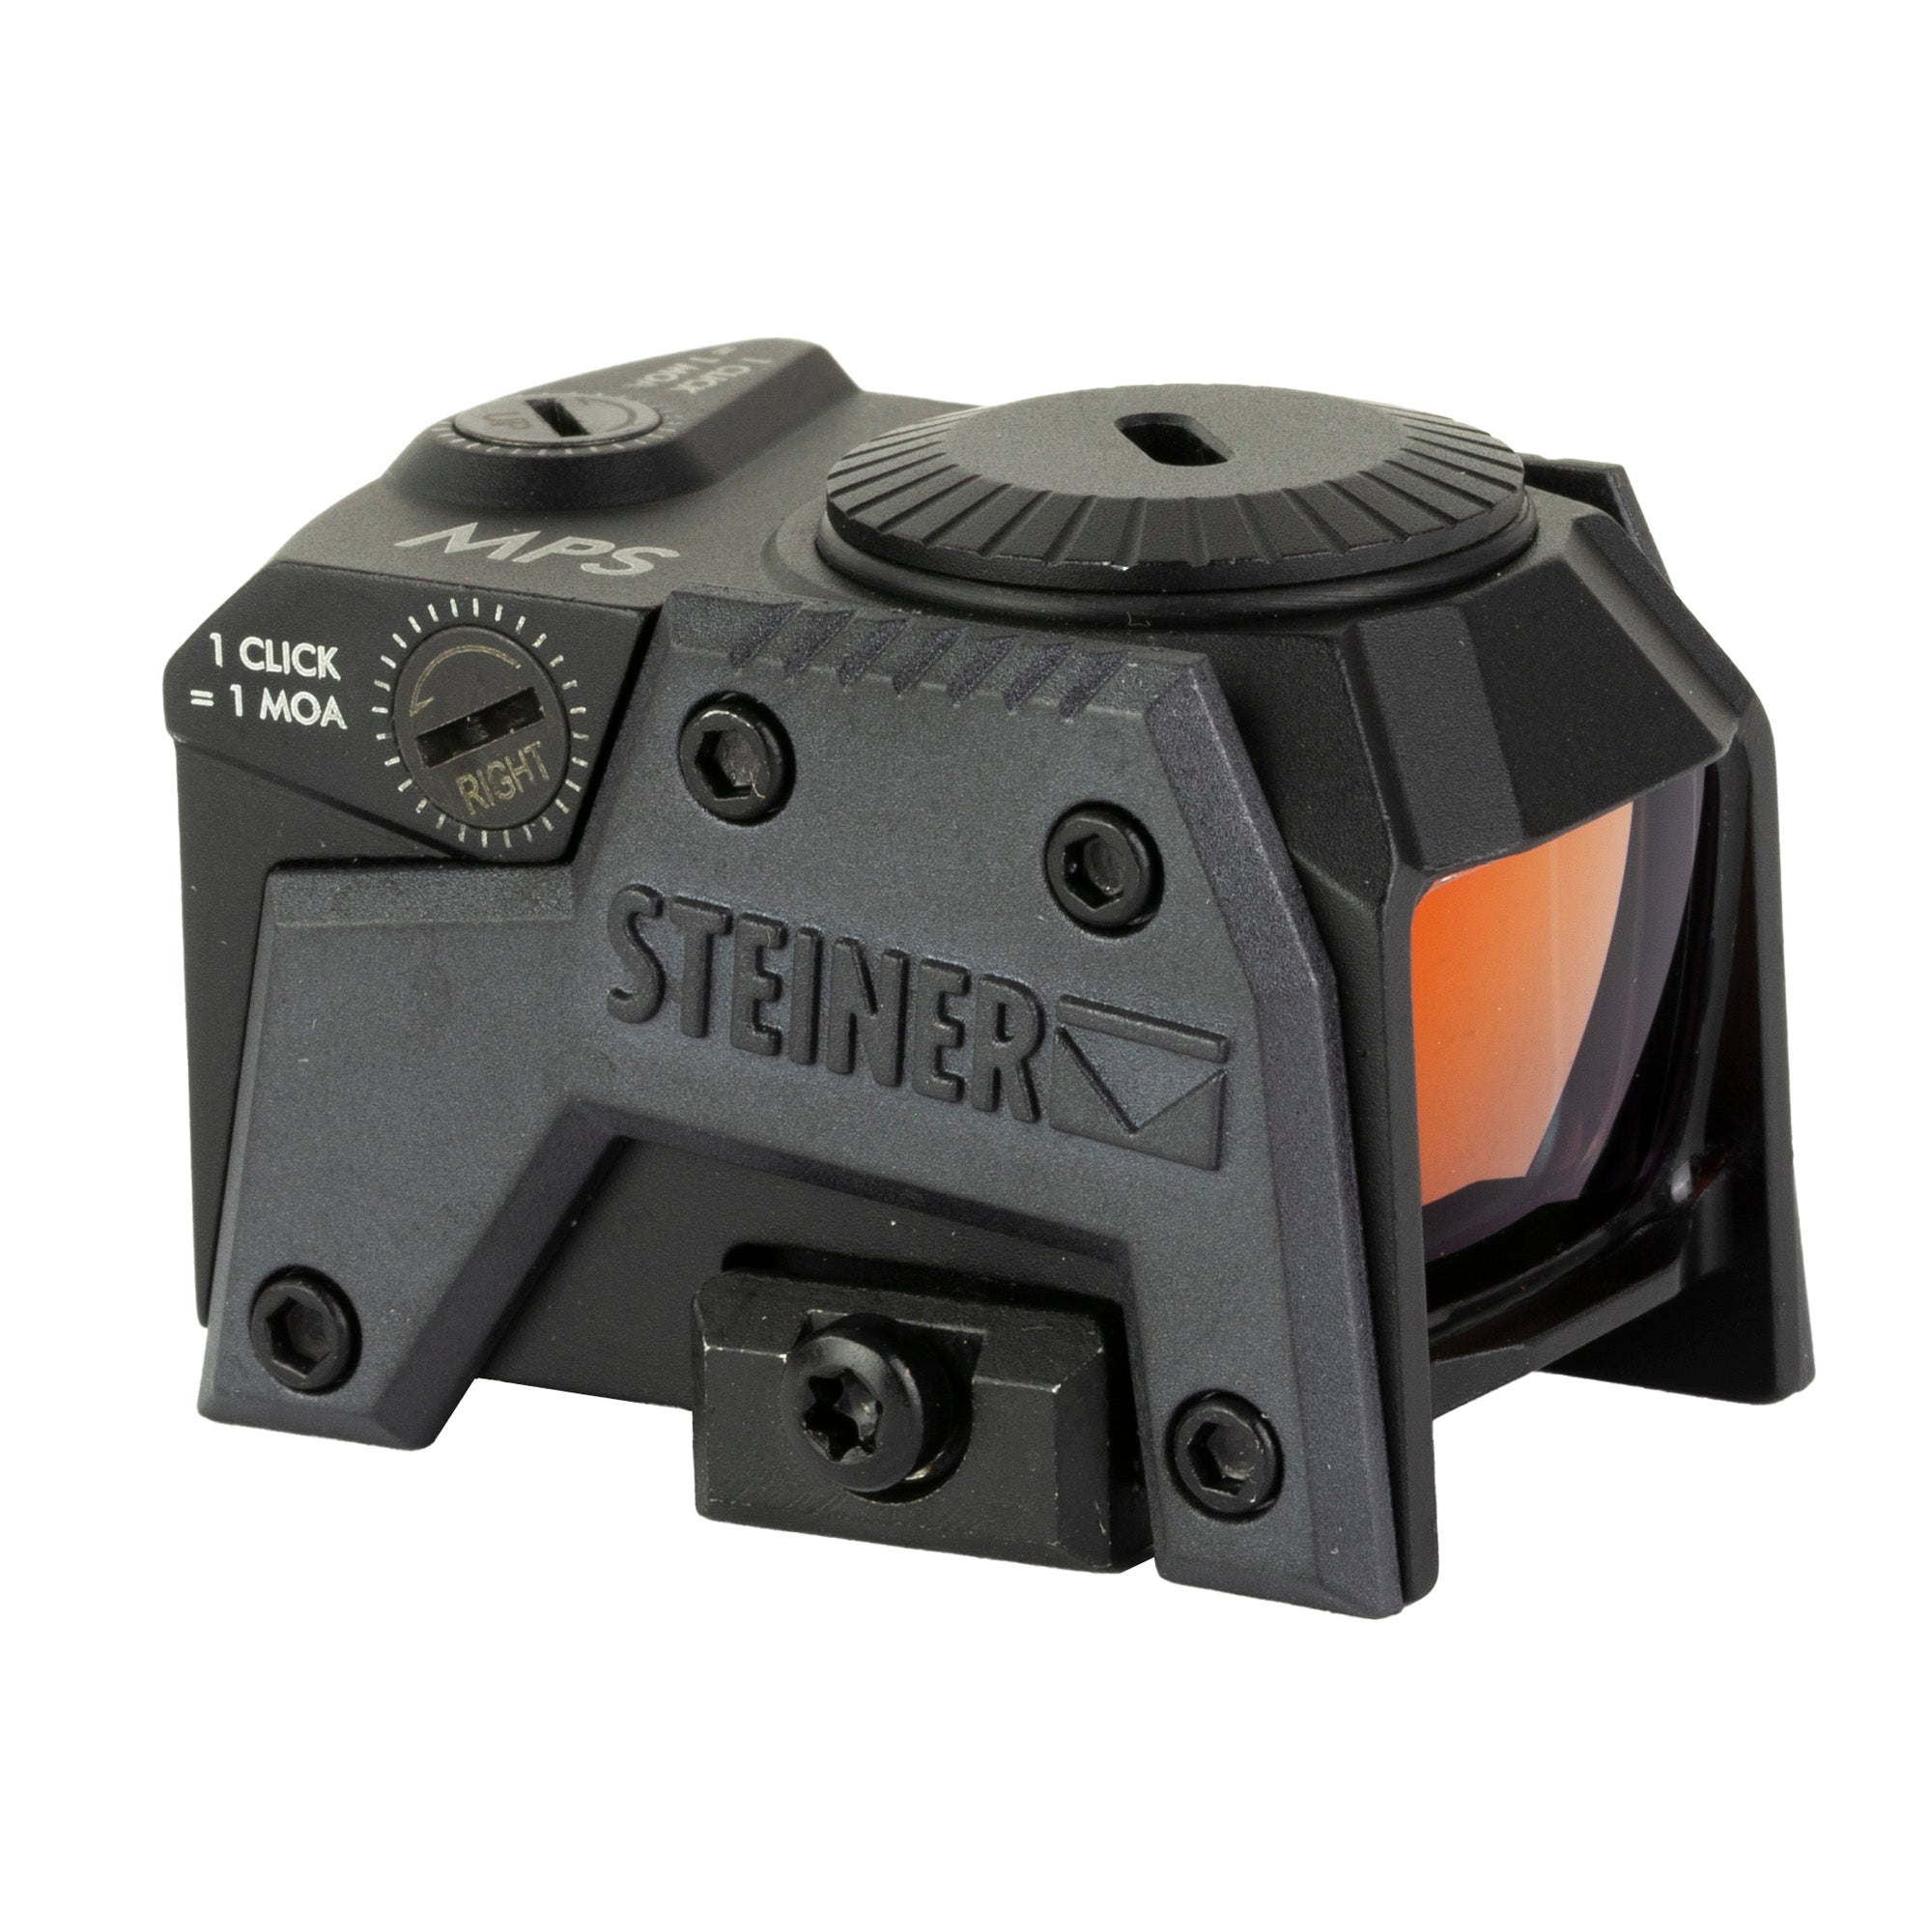 Steiner MPS 3 MOA Red Dot 3 MOA - ACRO Footprint